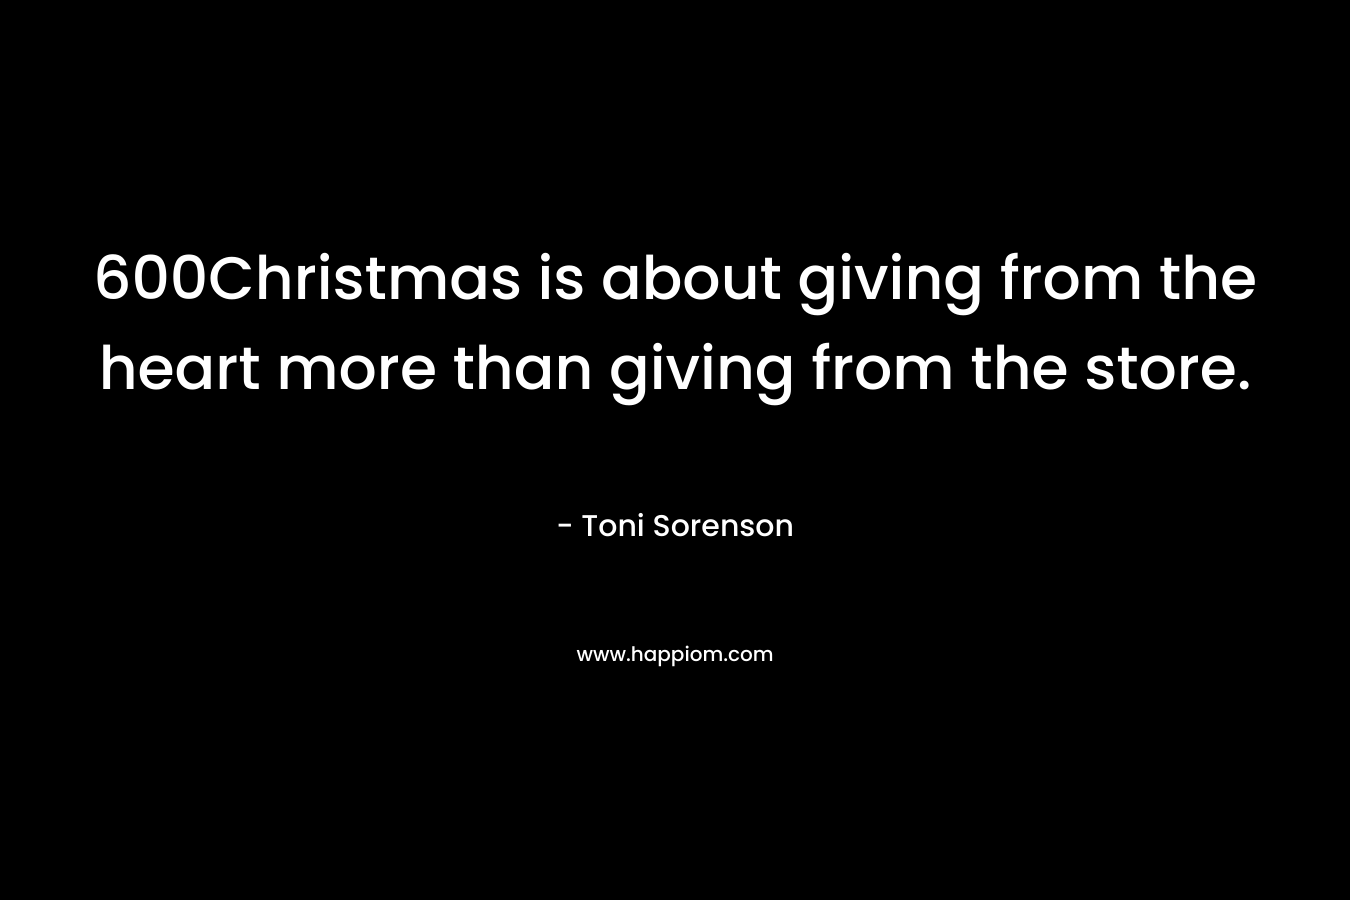 600Christmas is about giving from the heart more than giving from the store. – Toni Sorenson